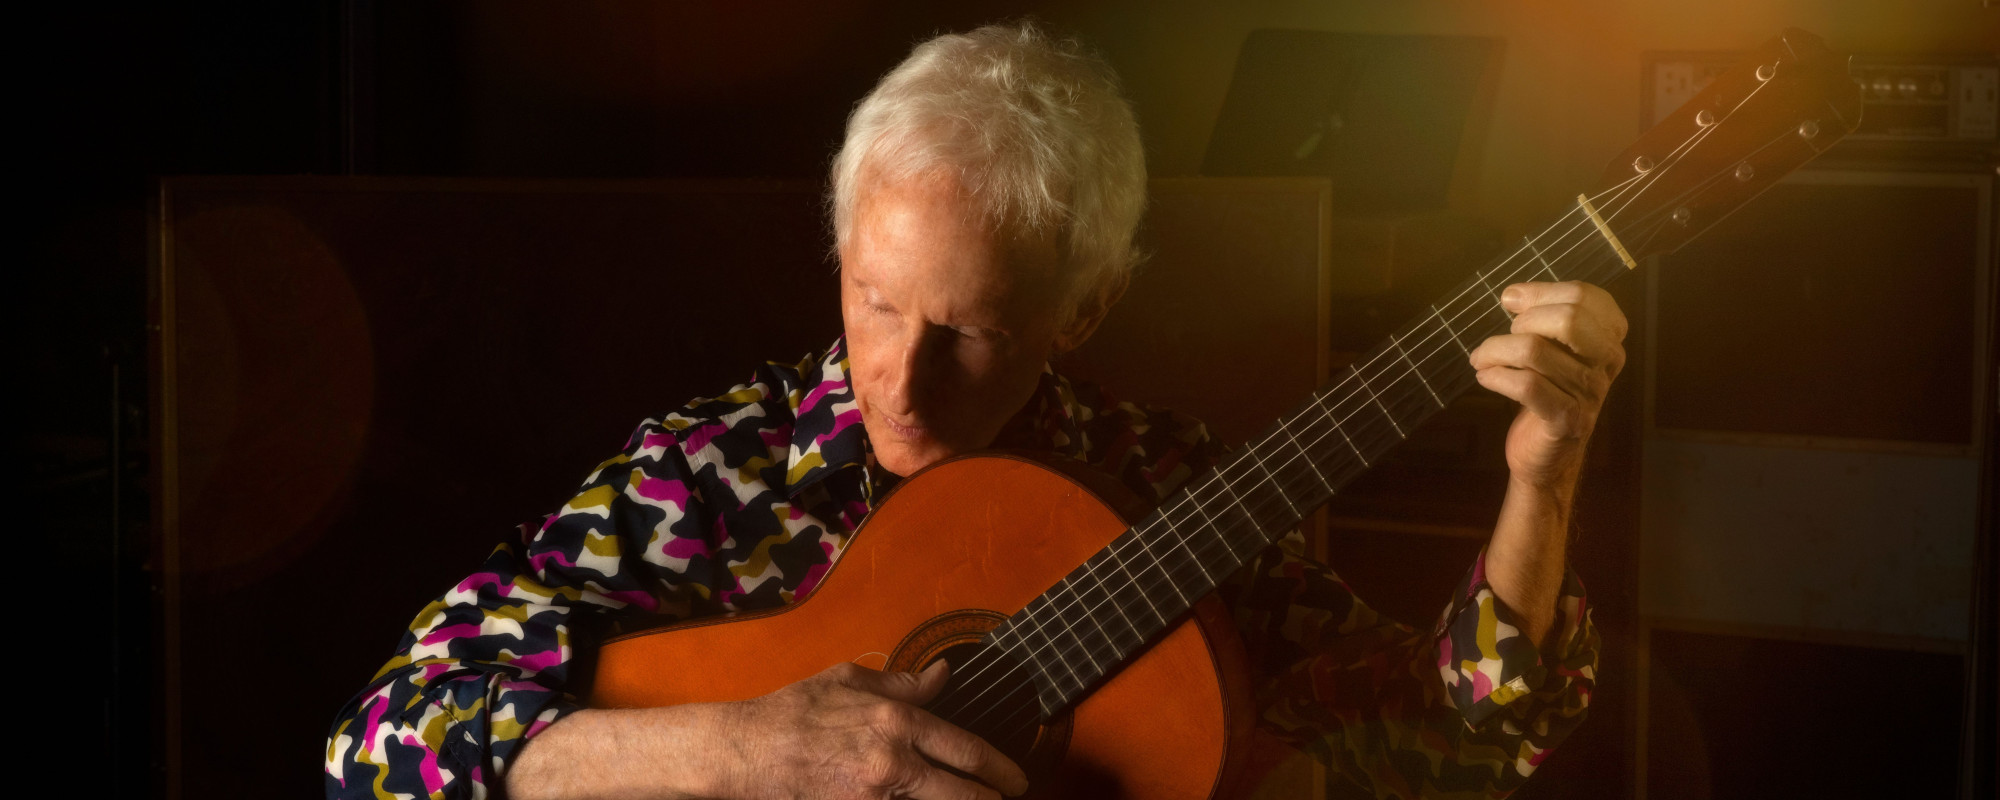 Robby Krieger: Writing on the Storm - American Songwriter